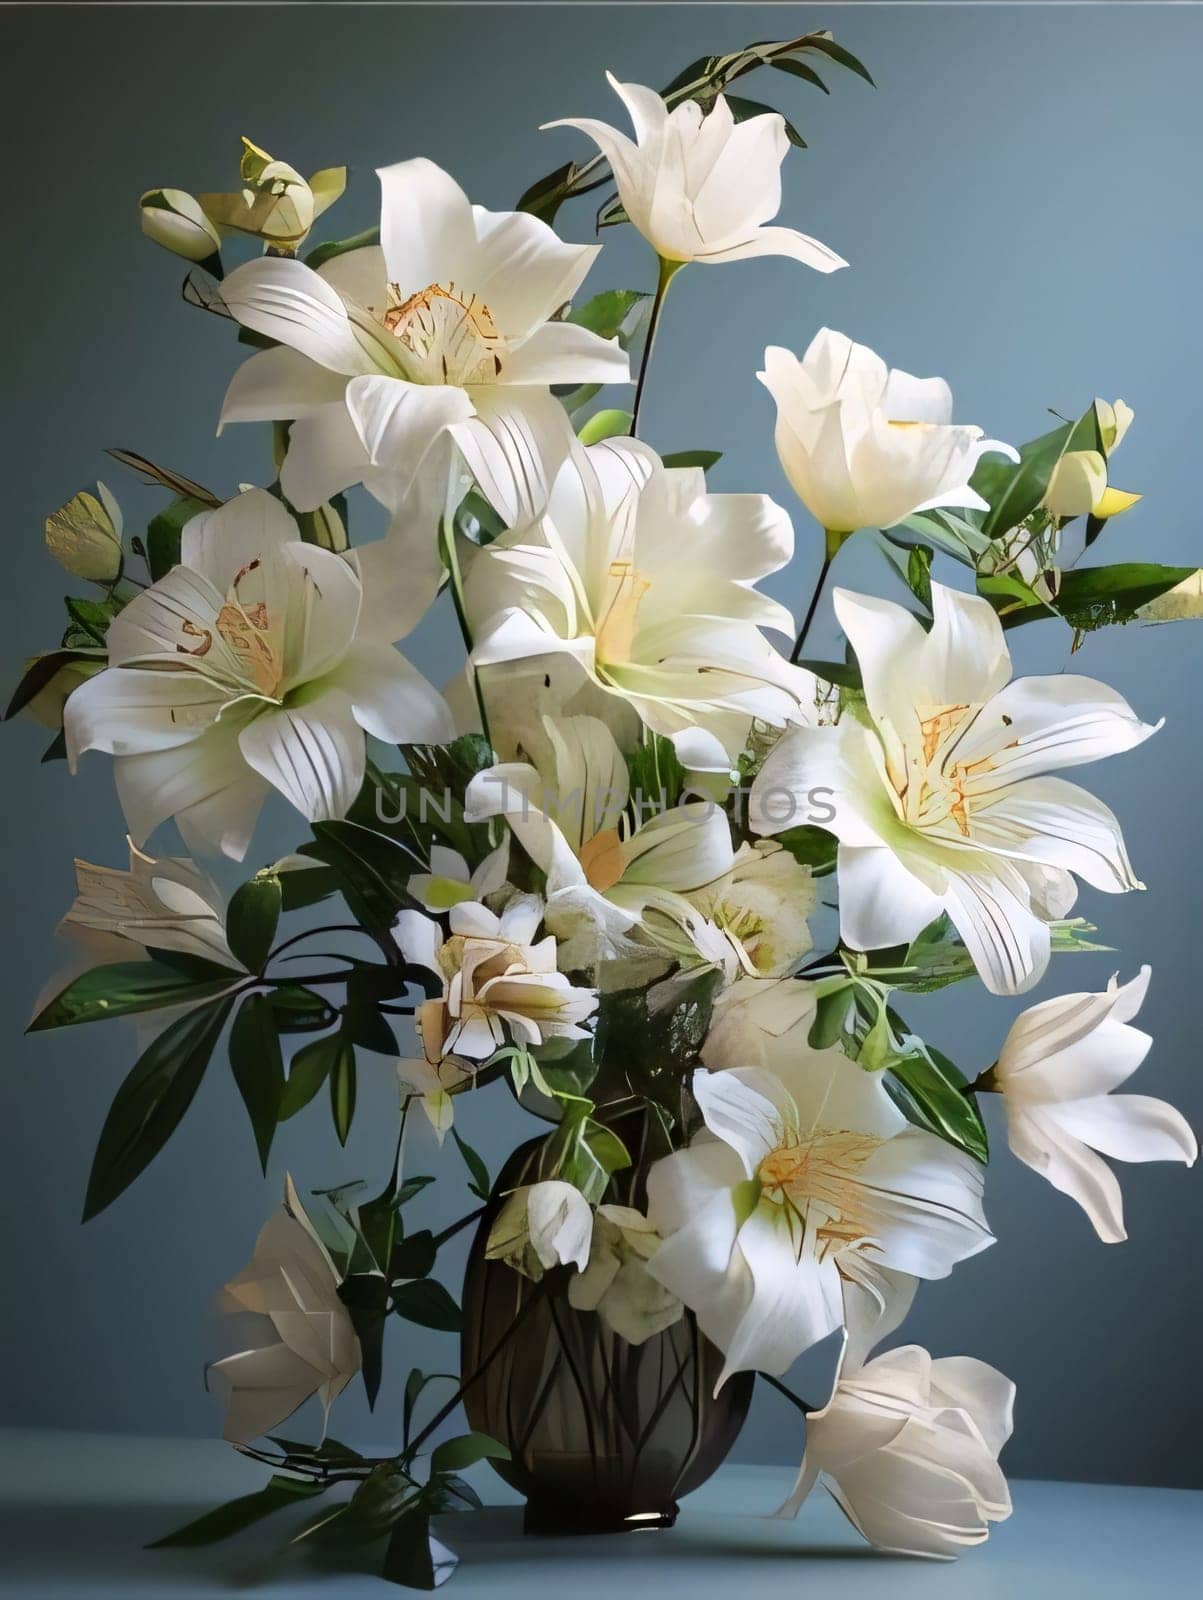 Bouquet of white lilies with green leaves in a vase gray background. Flowering flowers, a symbol of spring, new life. A joyful time of nature waking up to life.